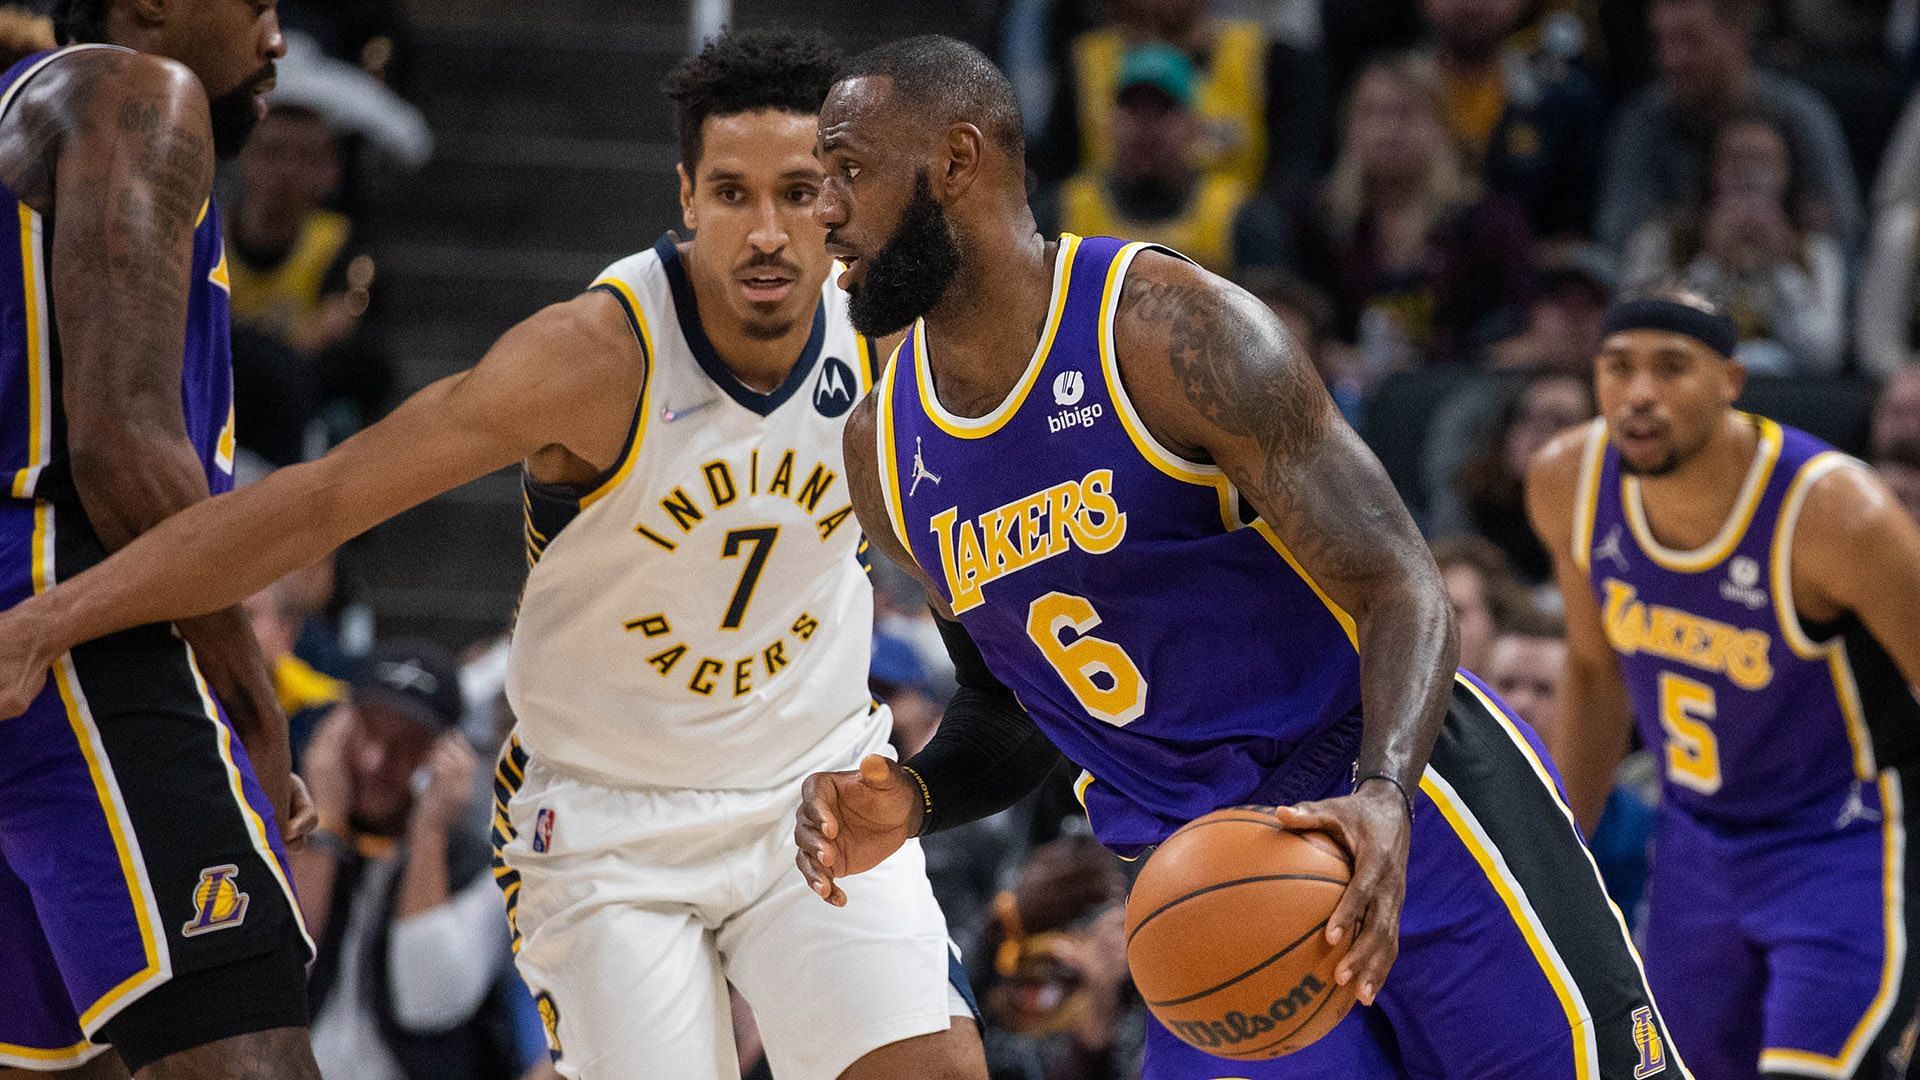 The visiting Indiana Pacers just evened their season series against the LA Lakers. [Photo: NBA.com]